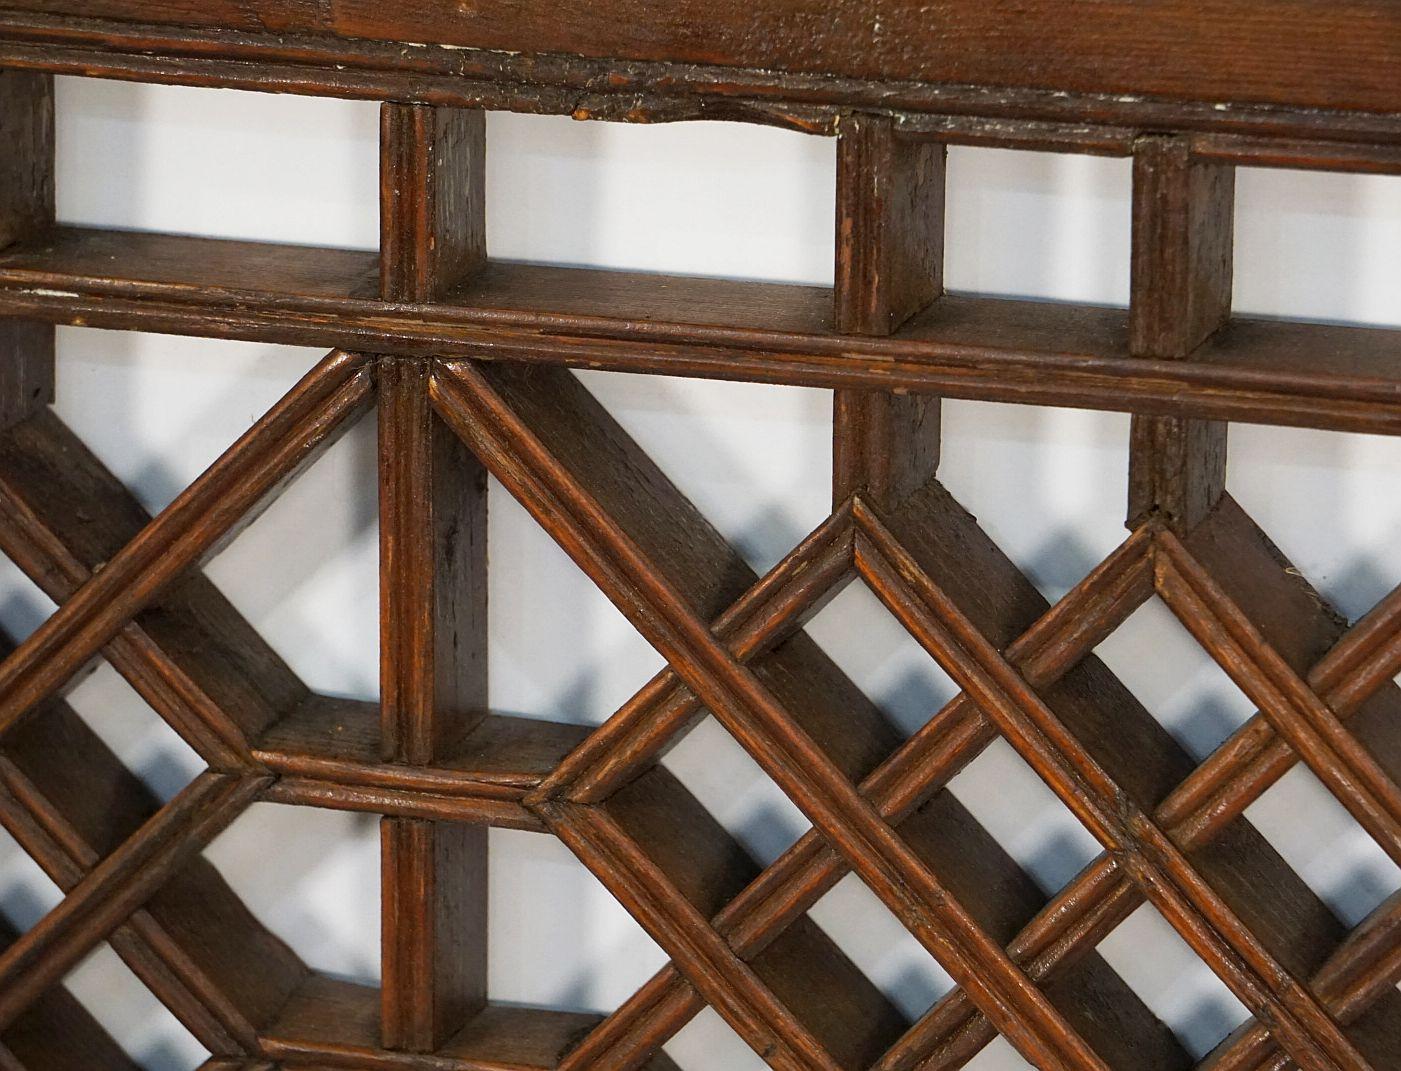 Chinese Decorative Lattice Wood Panels or Window Screens - Sold as a Set 2